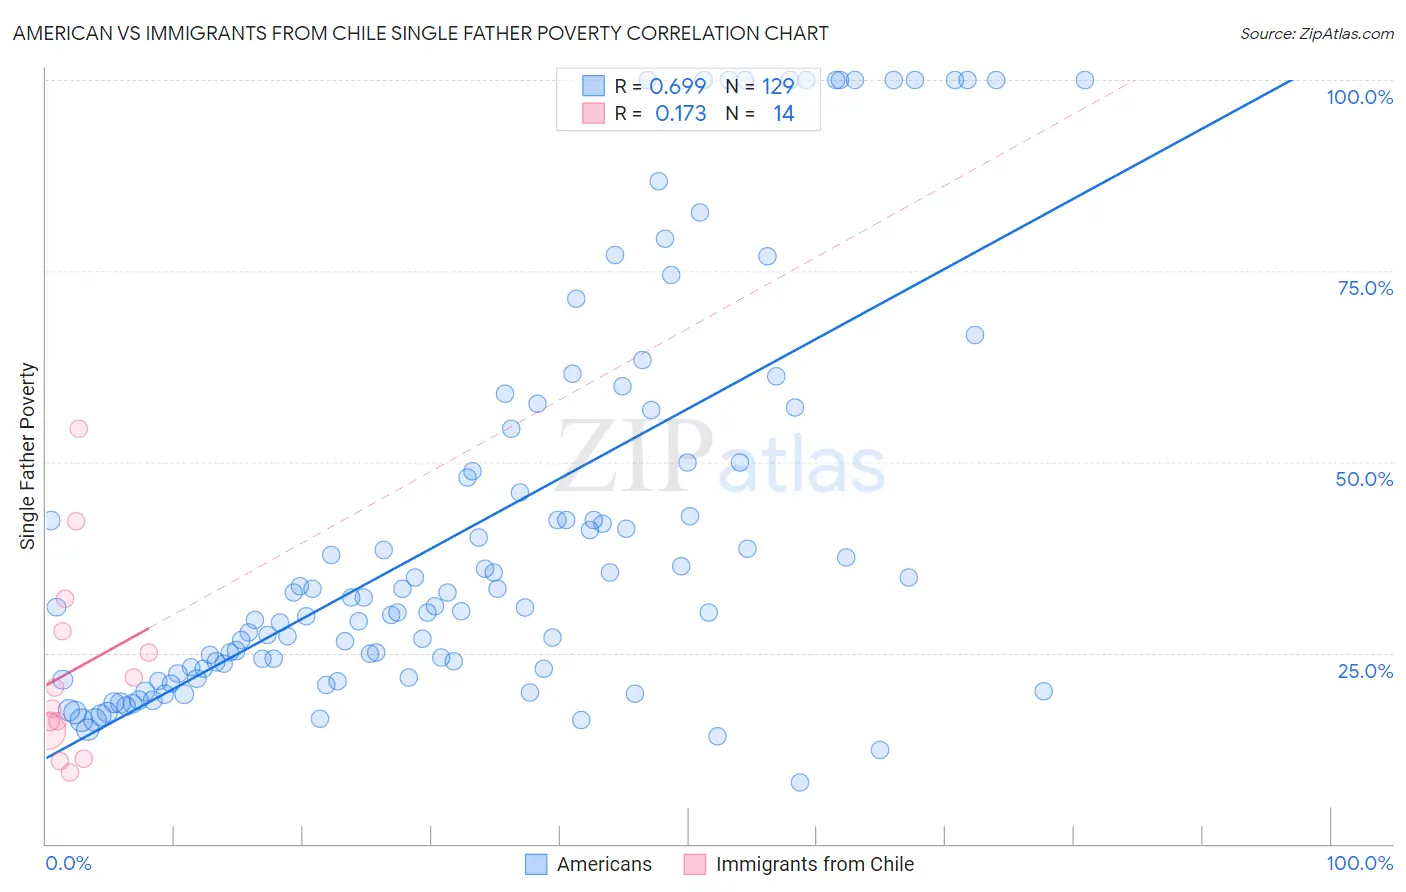 American vs Immigrants from Chile Single Father Poverty